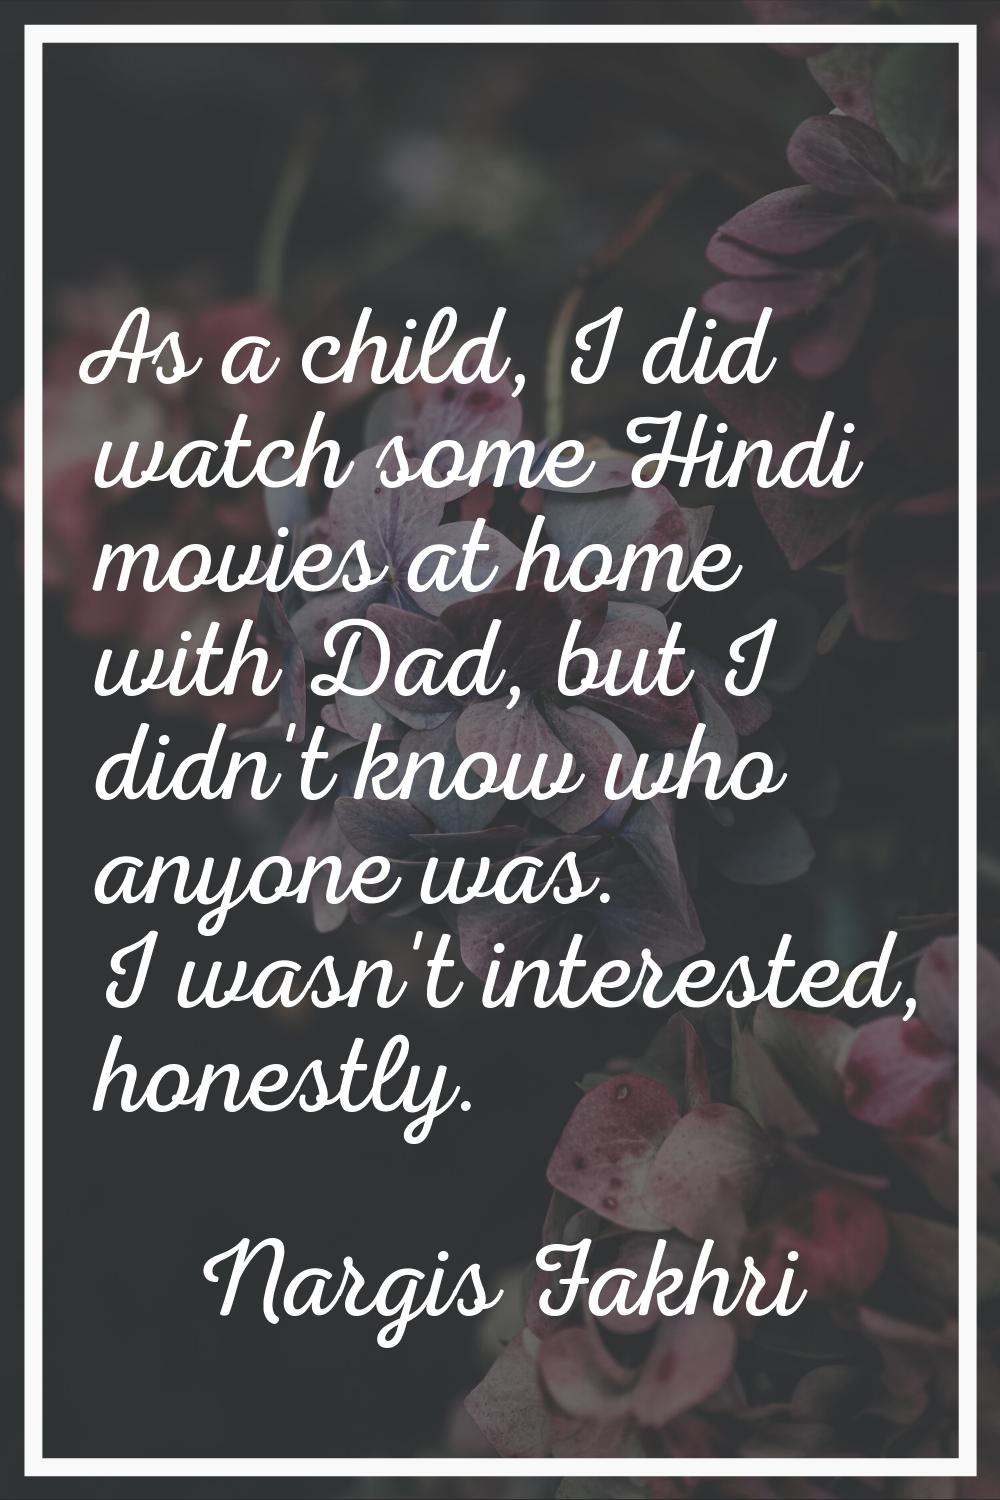 As a child, I did watch some Hindi movies at home with Dad, but I didn't know who anyone was. I was